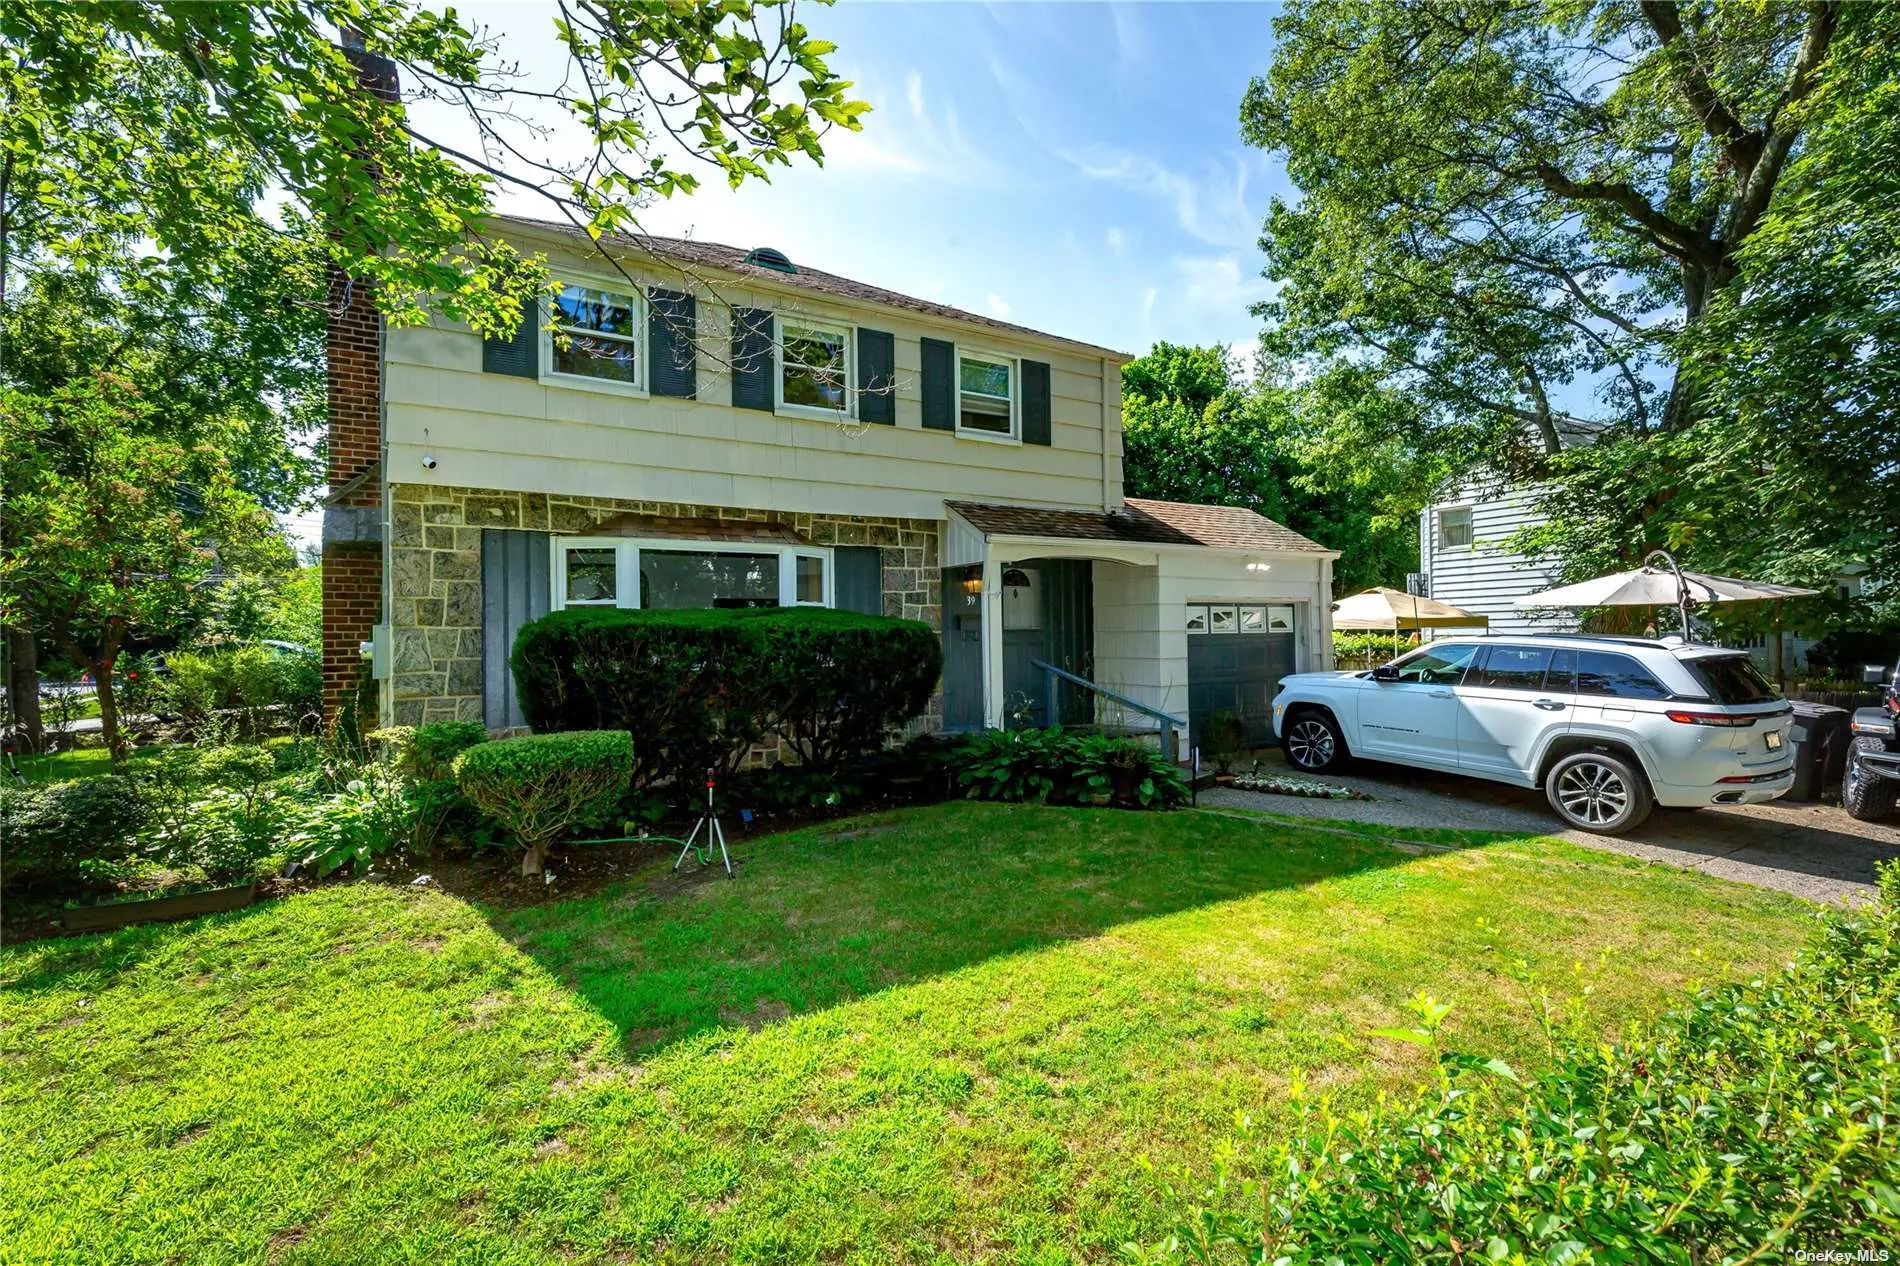 Won&rsquo;t last long! Lowest price on prestigious Kings Point Road, the most sought after location in Great Neck, walking distance to amenities no other community has: one block from Long Island Sound and famous Stepping Store Park with children pool+water park and marina access, resort like Parkway Pool Park, indoor skating ring, indoor and outdoor tennis courts, hiking park, and Great Neck Schools! 3 bedrooms 2 bathrooms 1 attached garage, many recent updates, plus a bonus bedroom in basement, large corner lot. It&rsquo;s ready for a family with high quality living in mind.